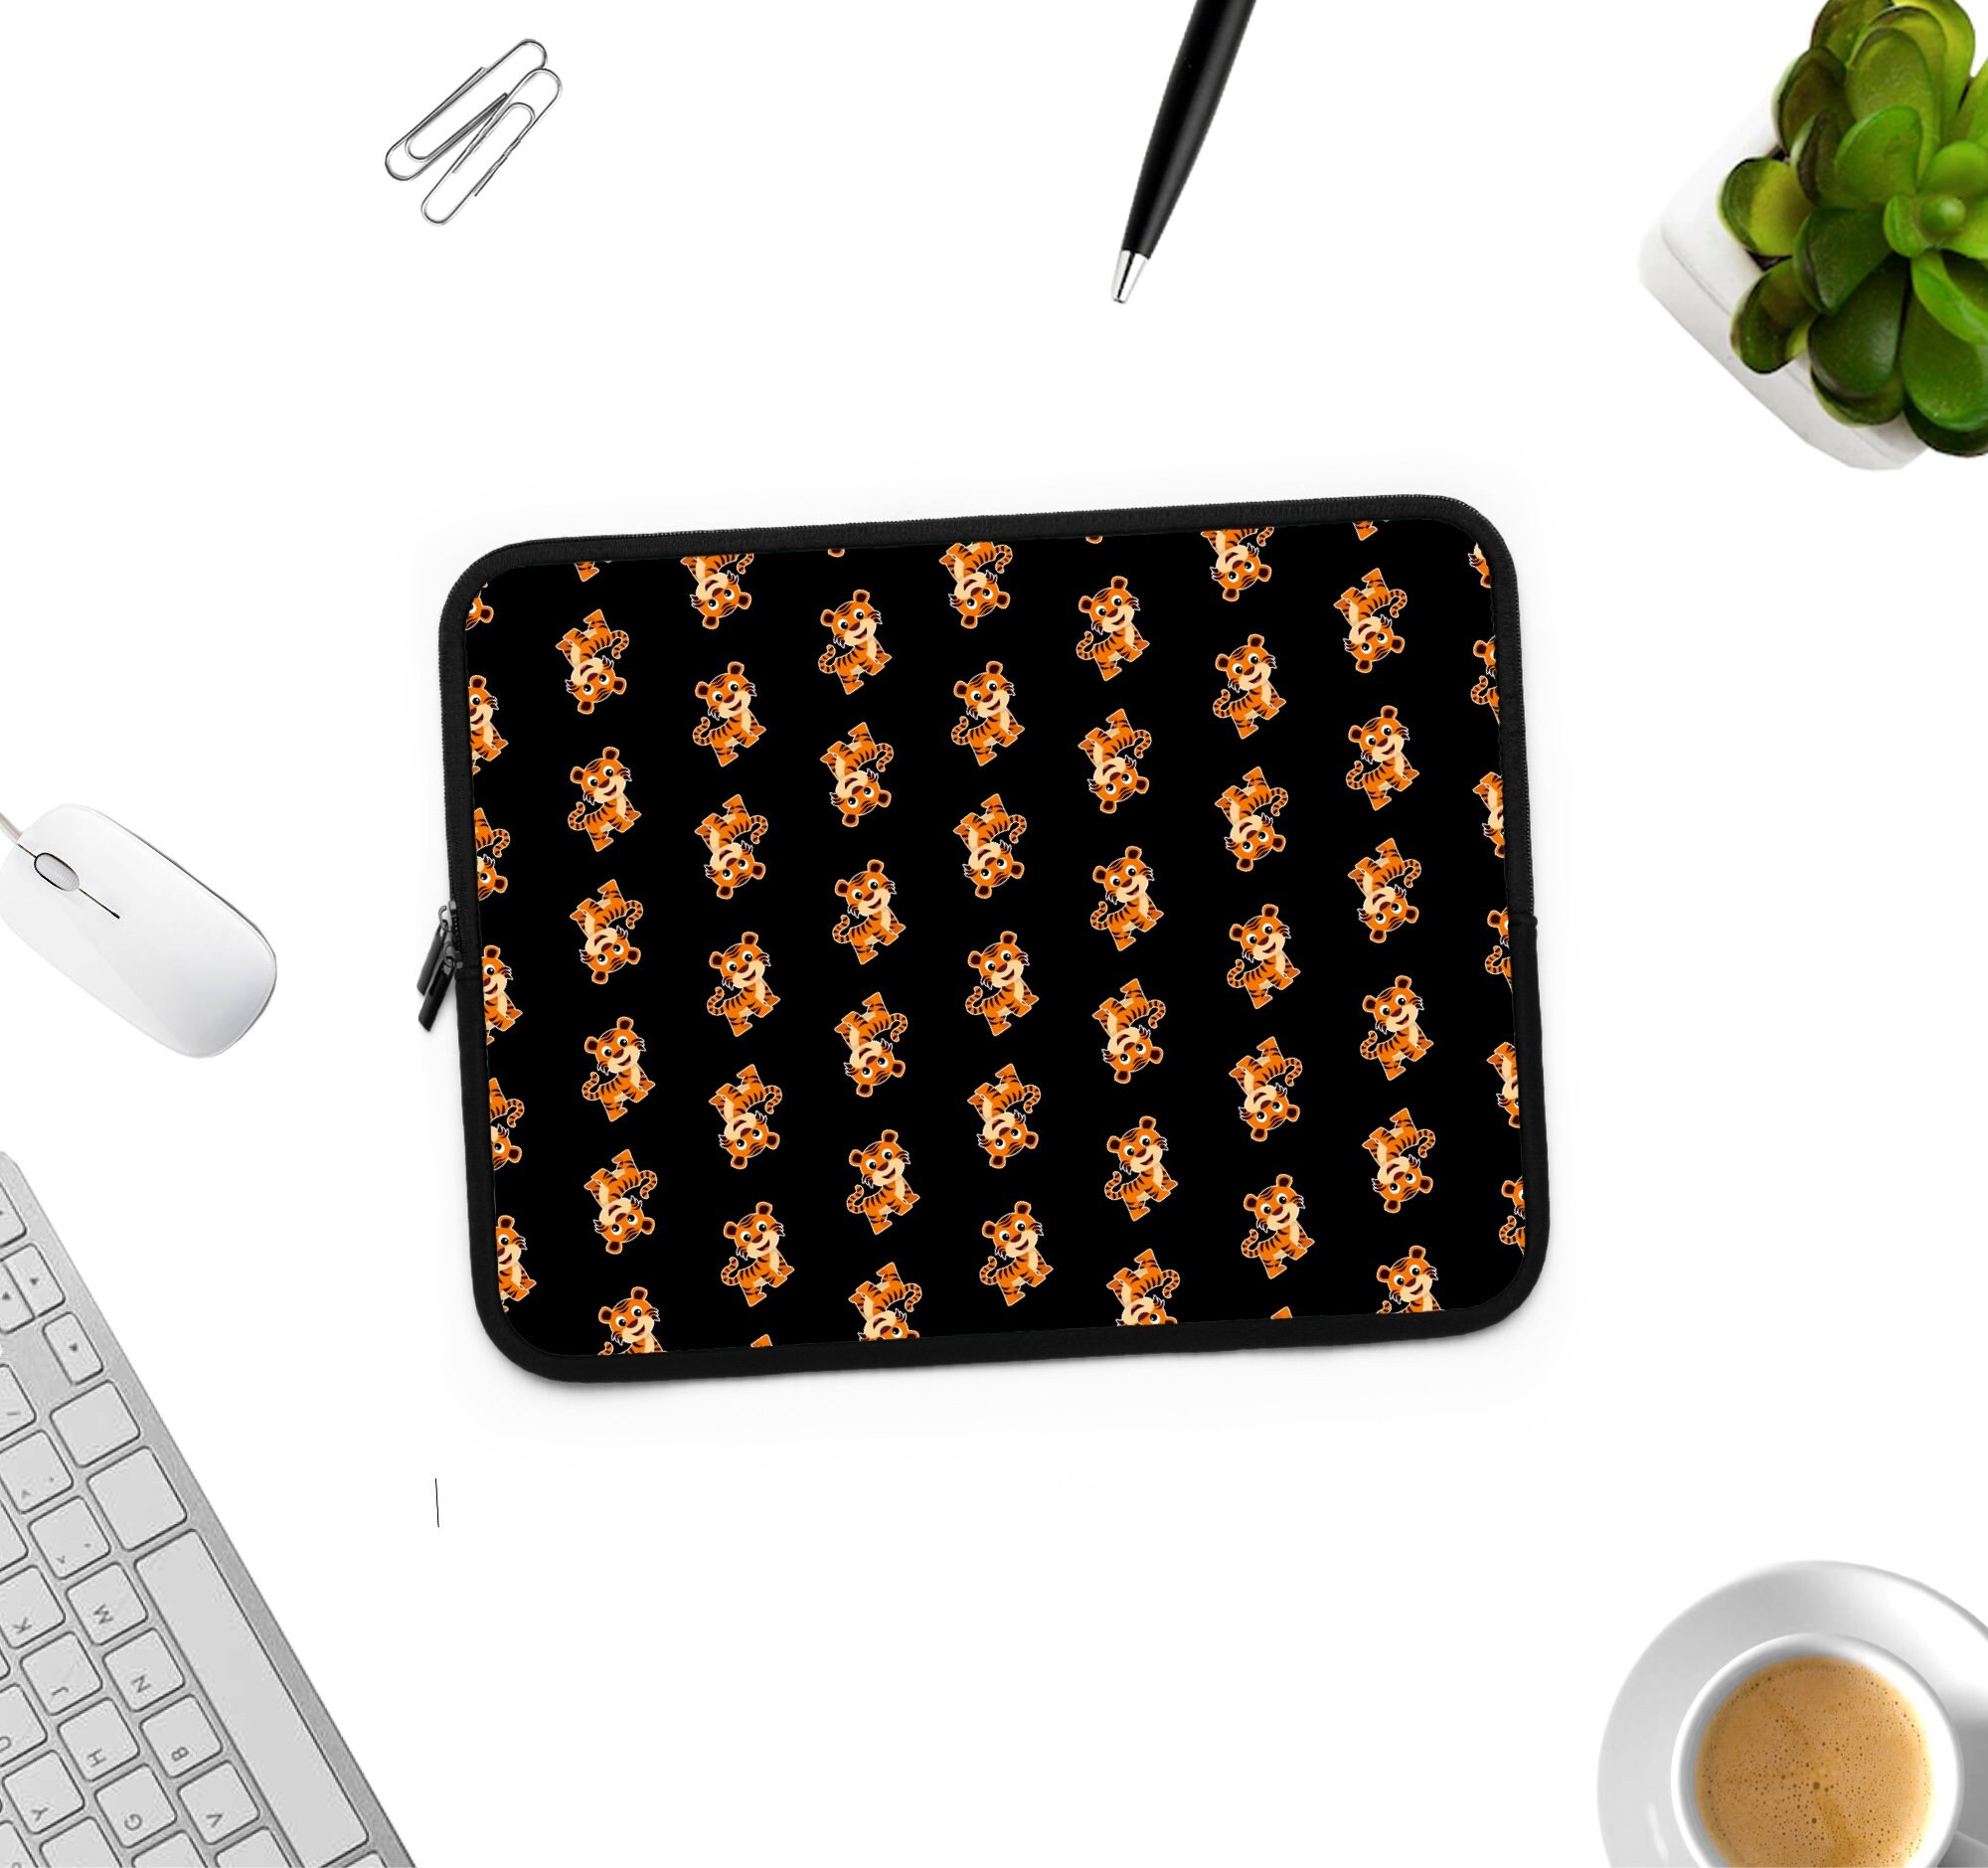 Tiger Laptop Case Sleeve Bag - Handmade - Quality Guarantee Big Cat Laptop  Sleeve - Tiger Case Support Mac Book iPad Surface Pro PC & More